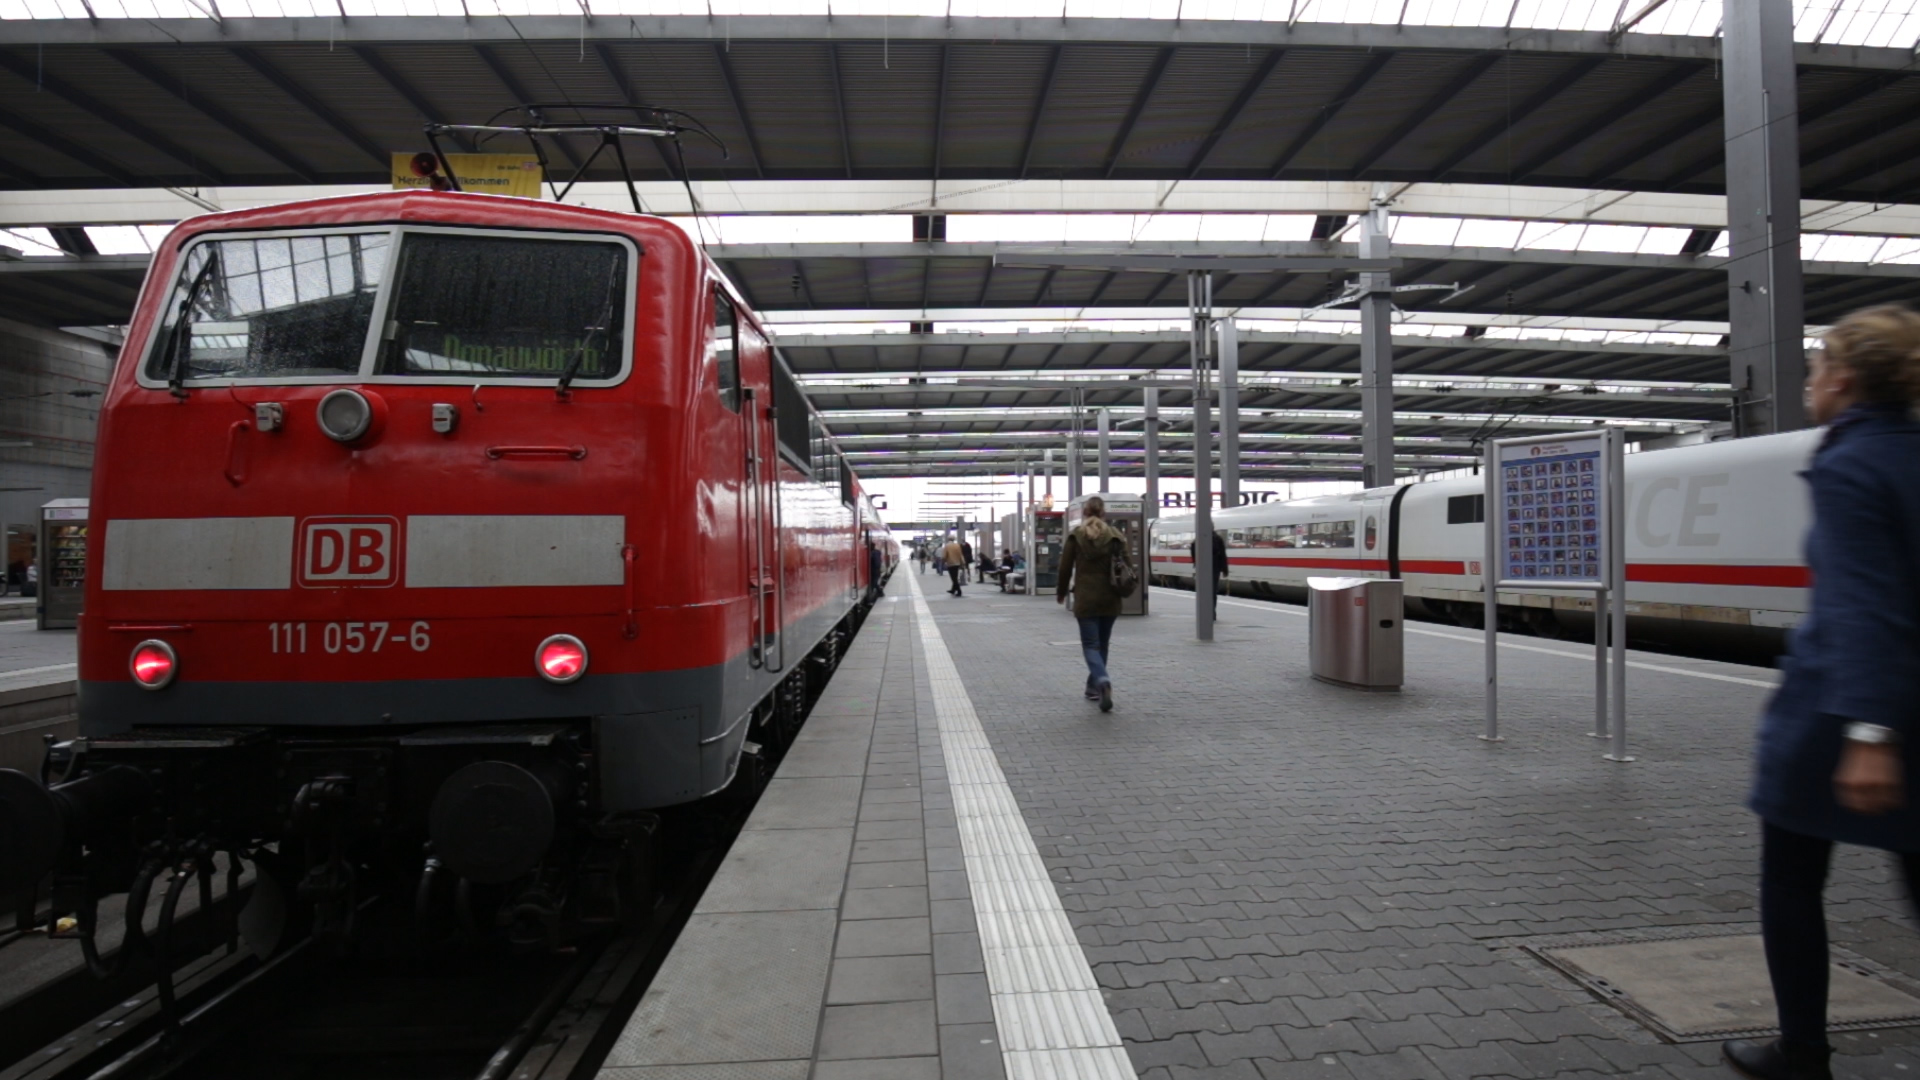 00:15] RED DB train at Munich HBF Train Station stock video footage ...